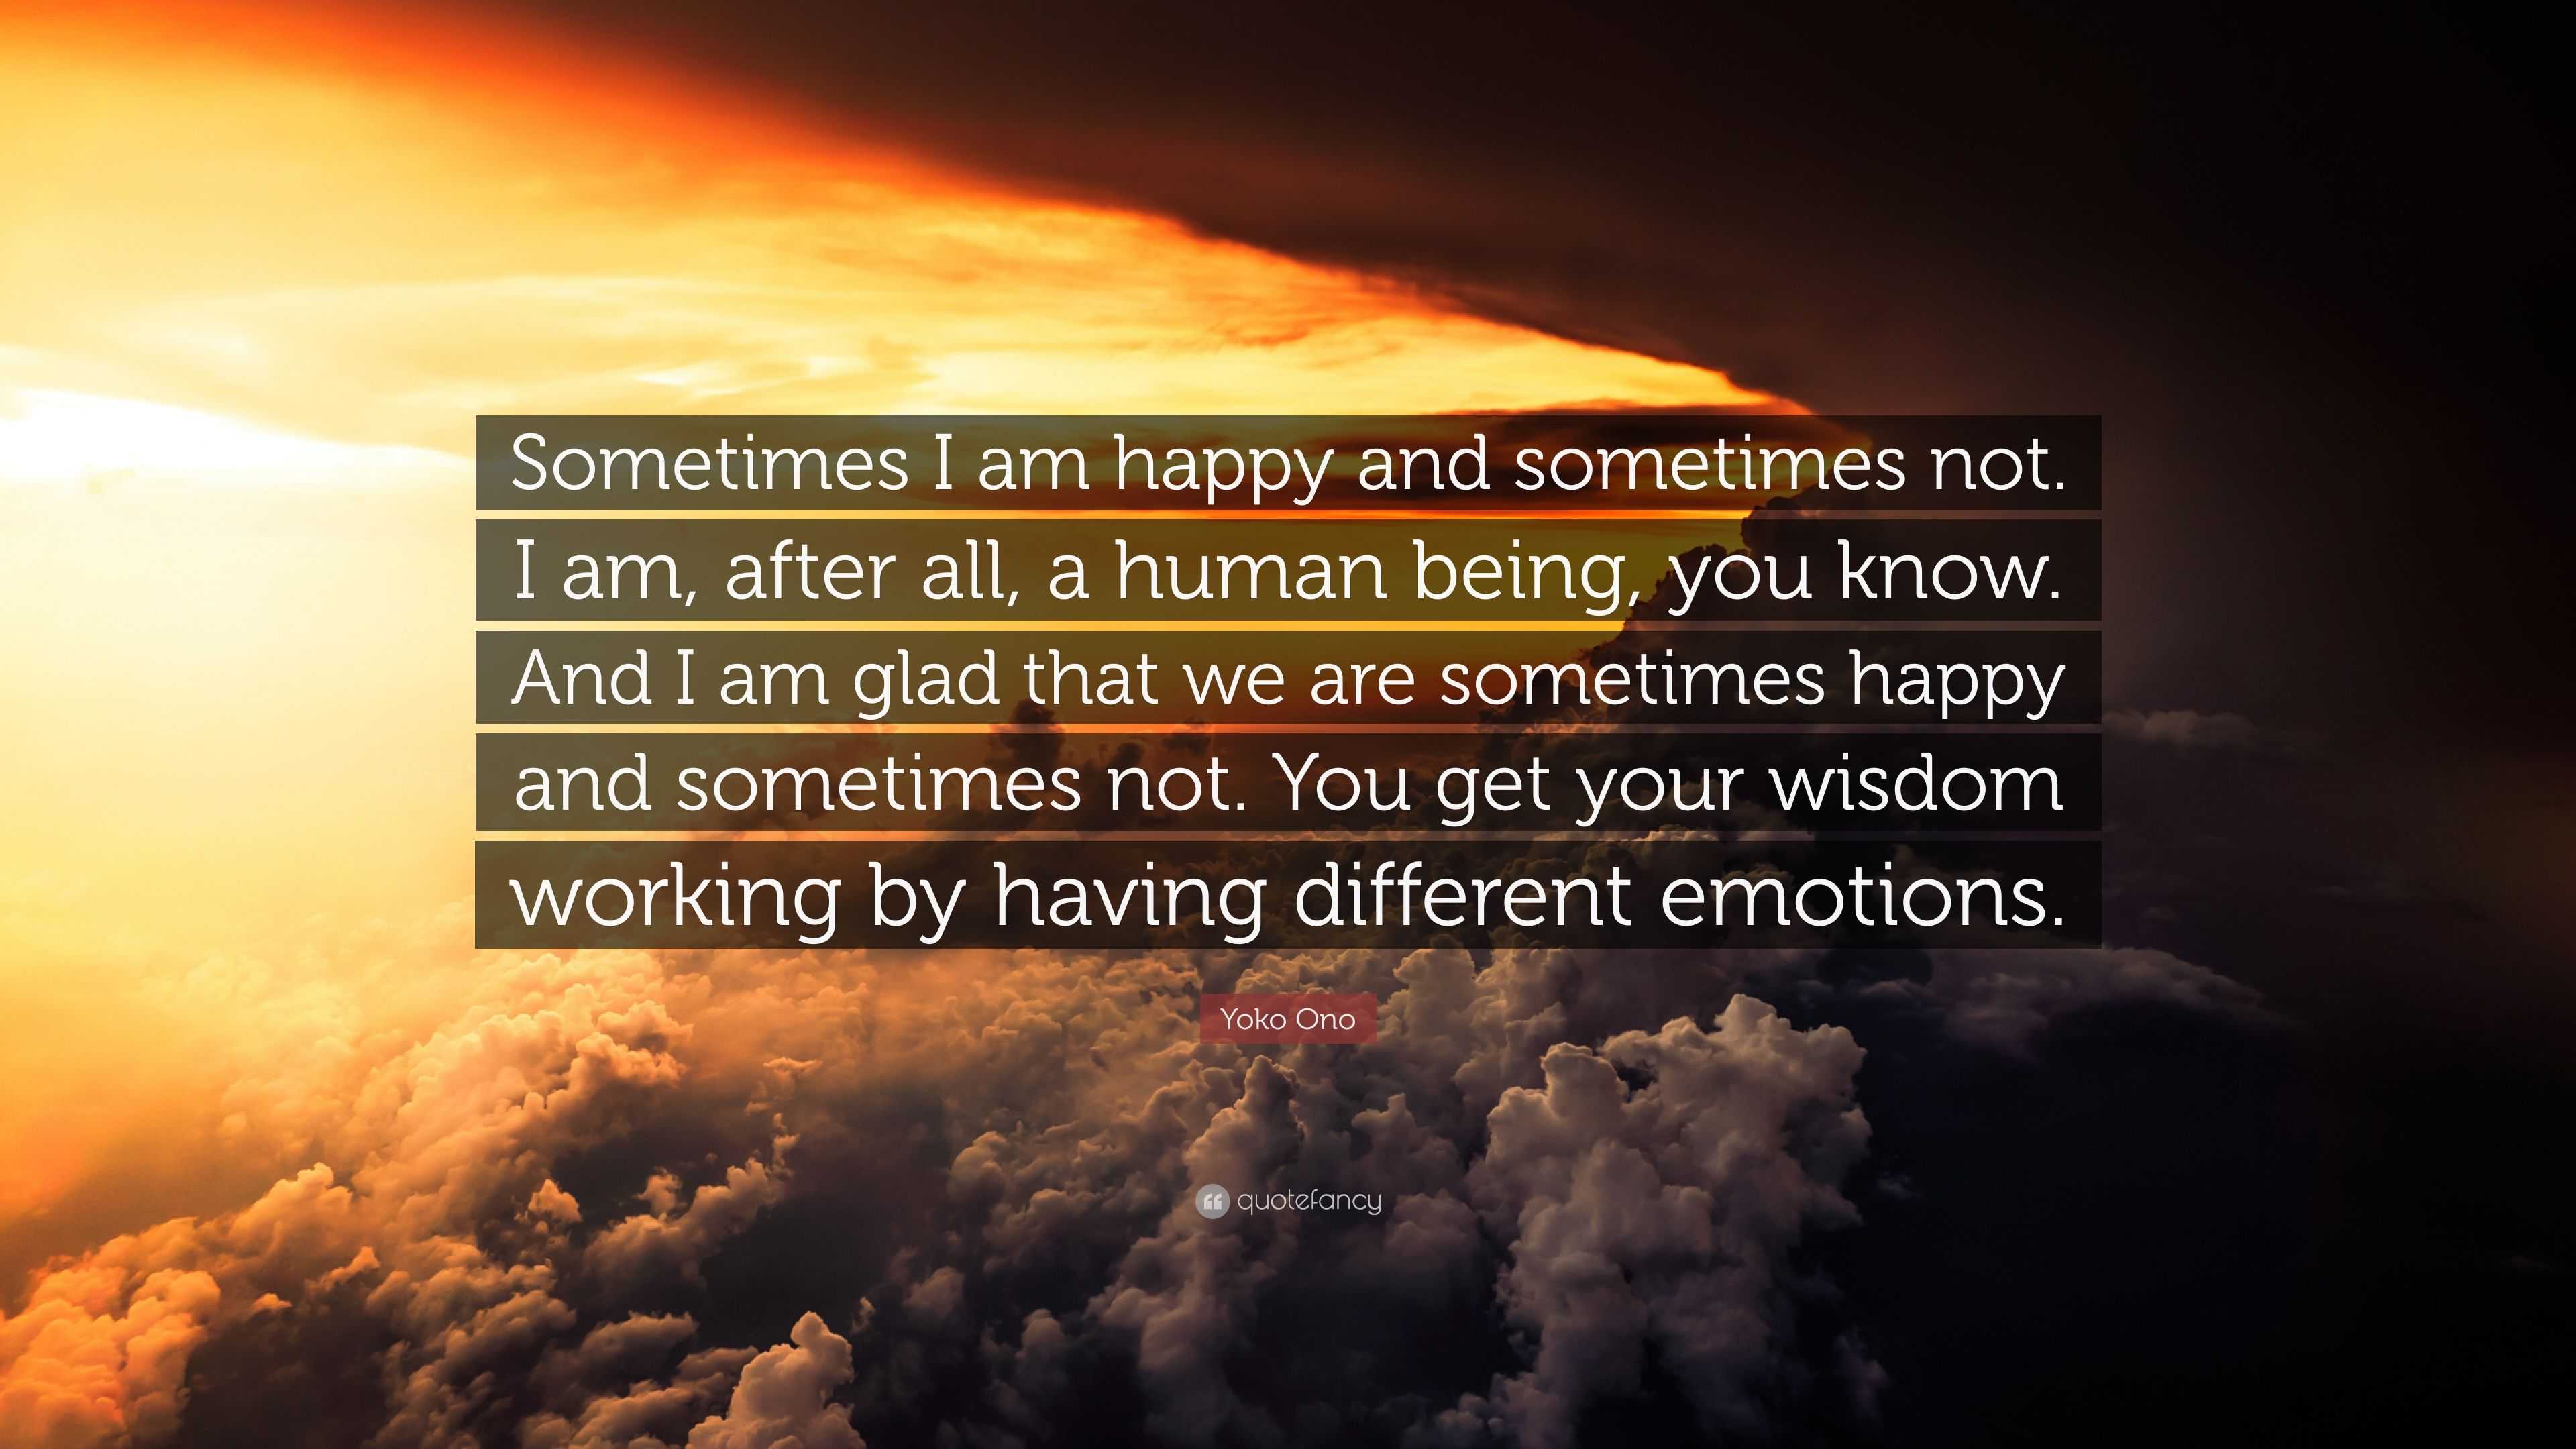 Yoko Ono Quote: “Sometimes I am happy and sometimes not. I am, after ...